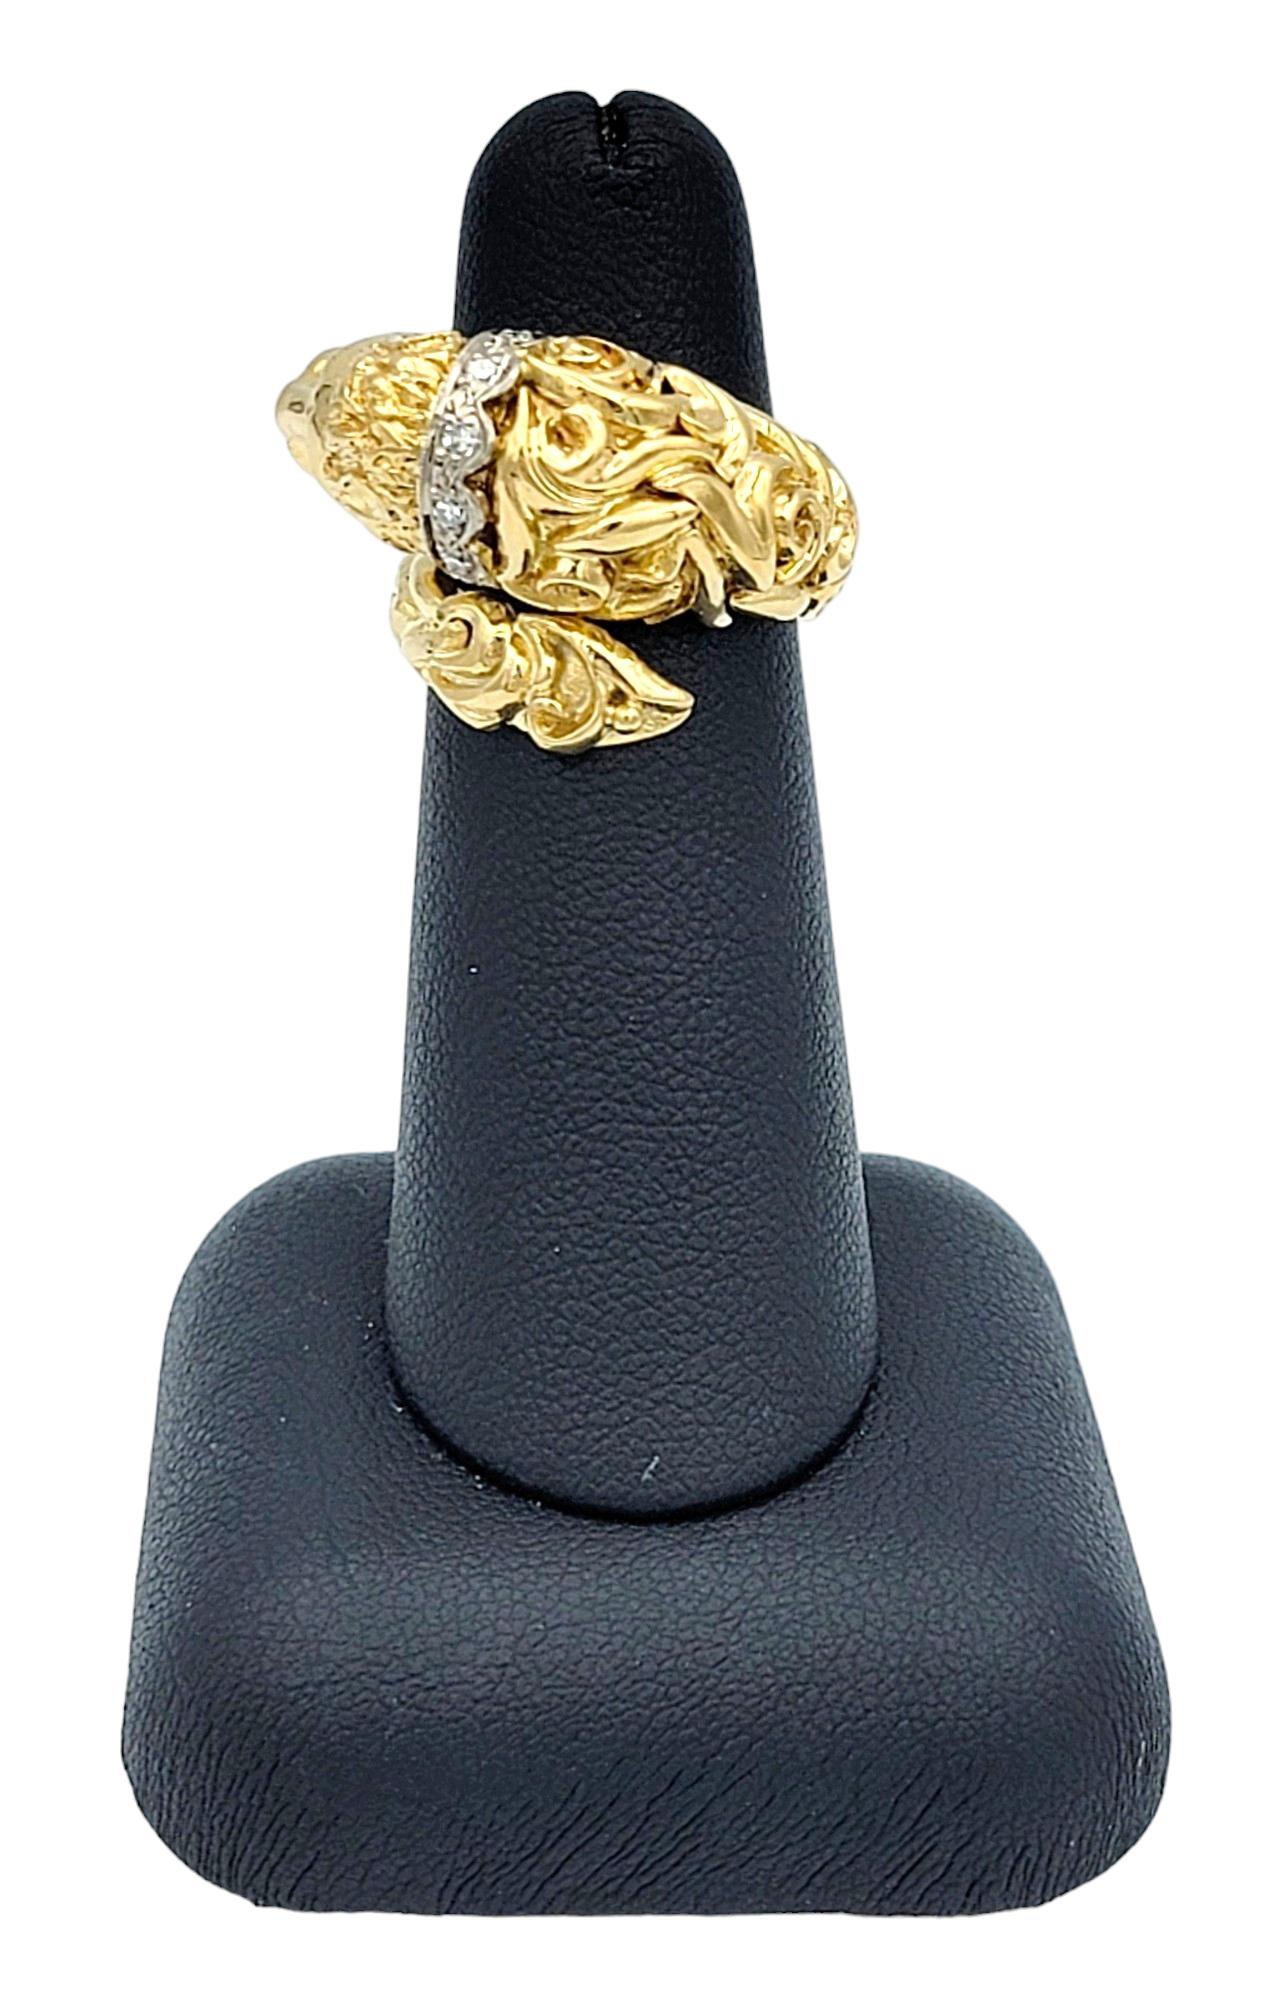 Lion Bypass Style Ring with Diamond Collar Set in 14 Karat Yellow and White Gold For Sale 2